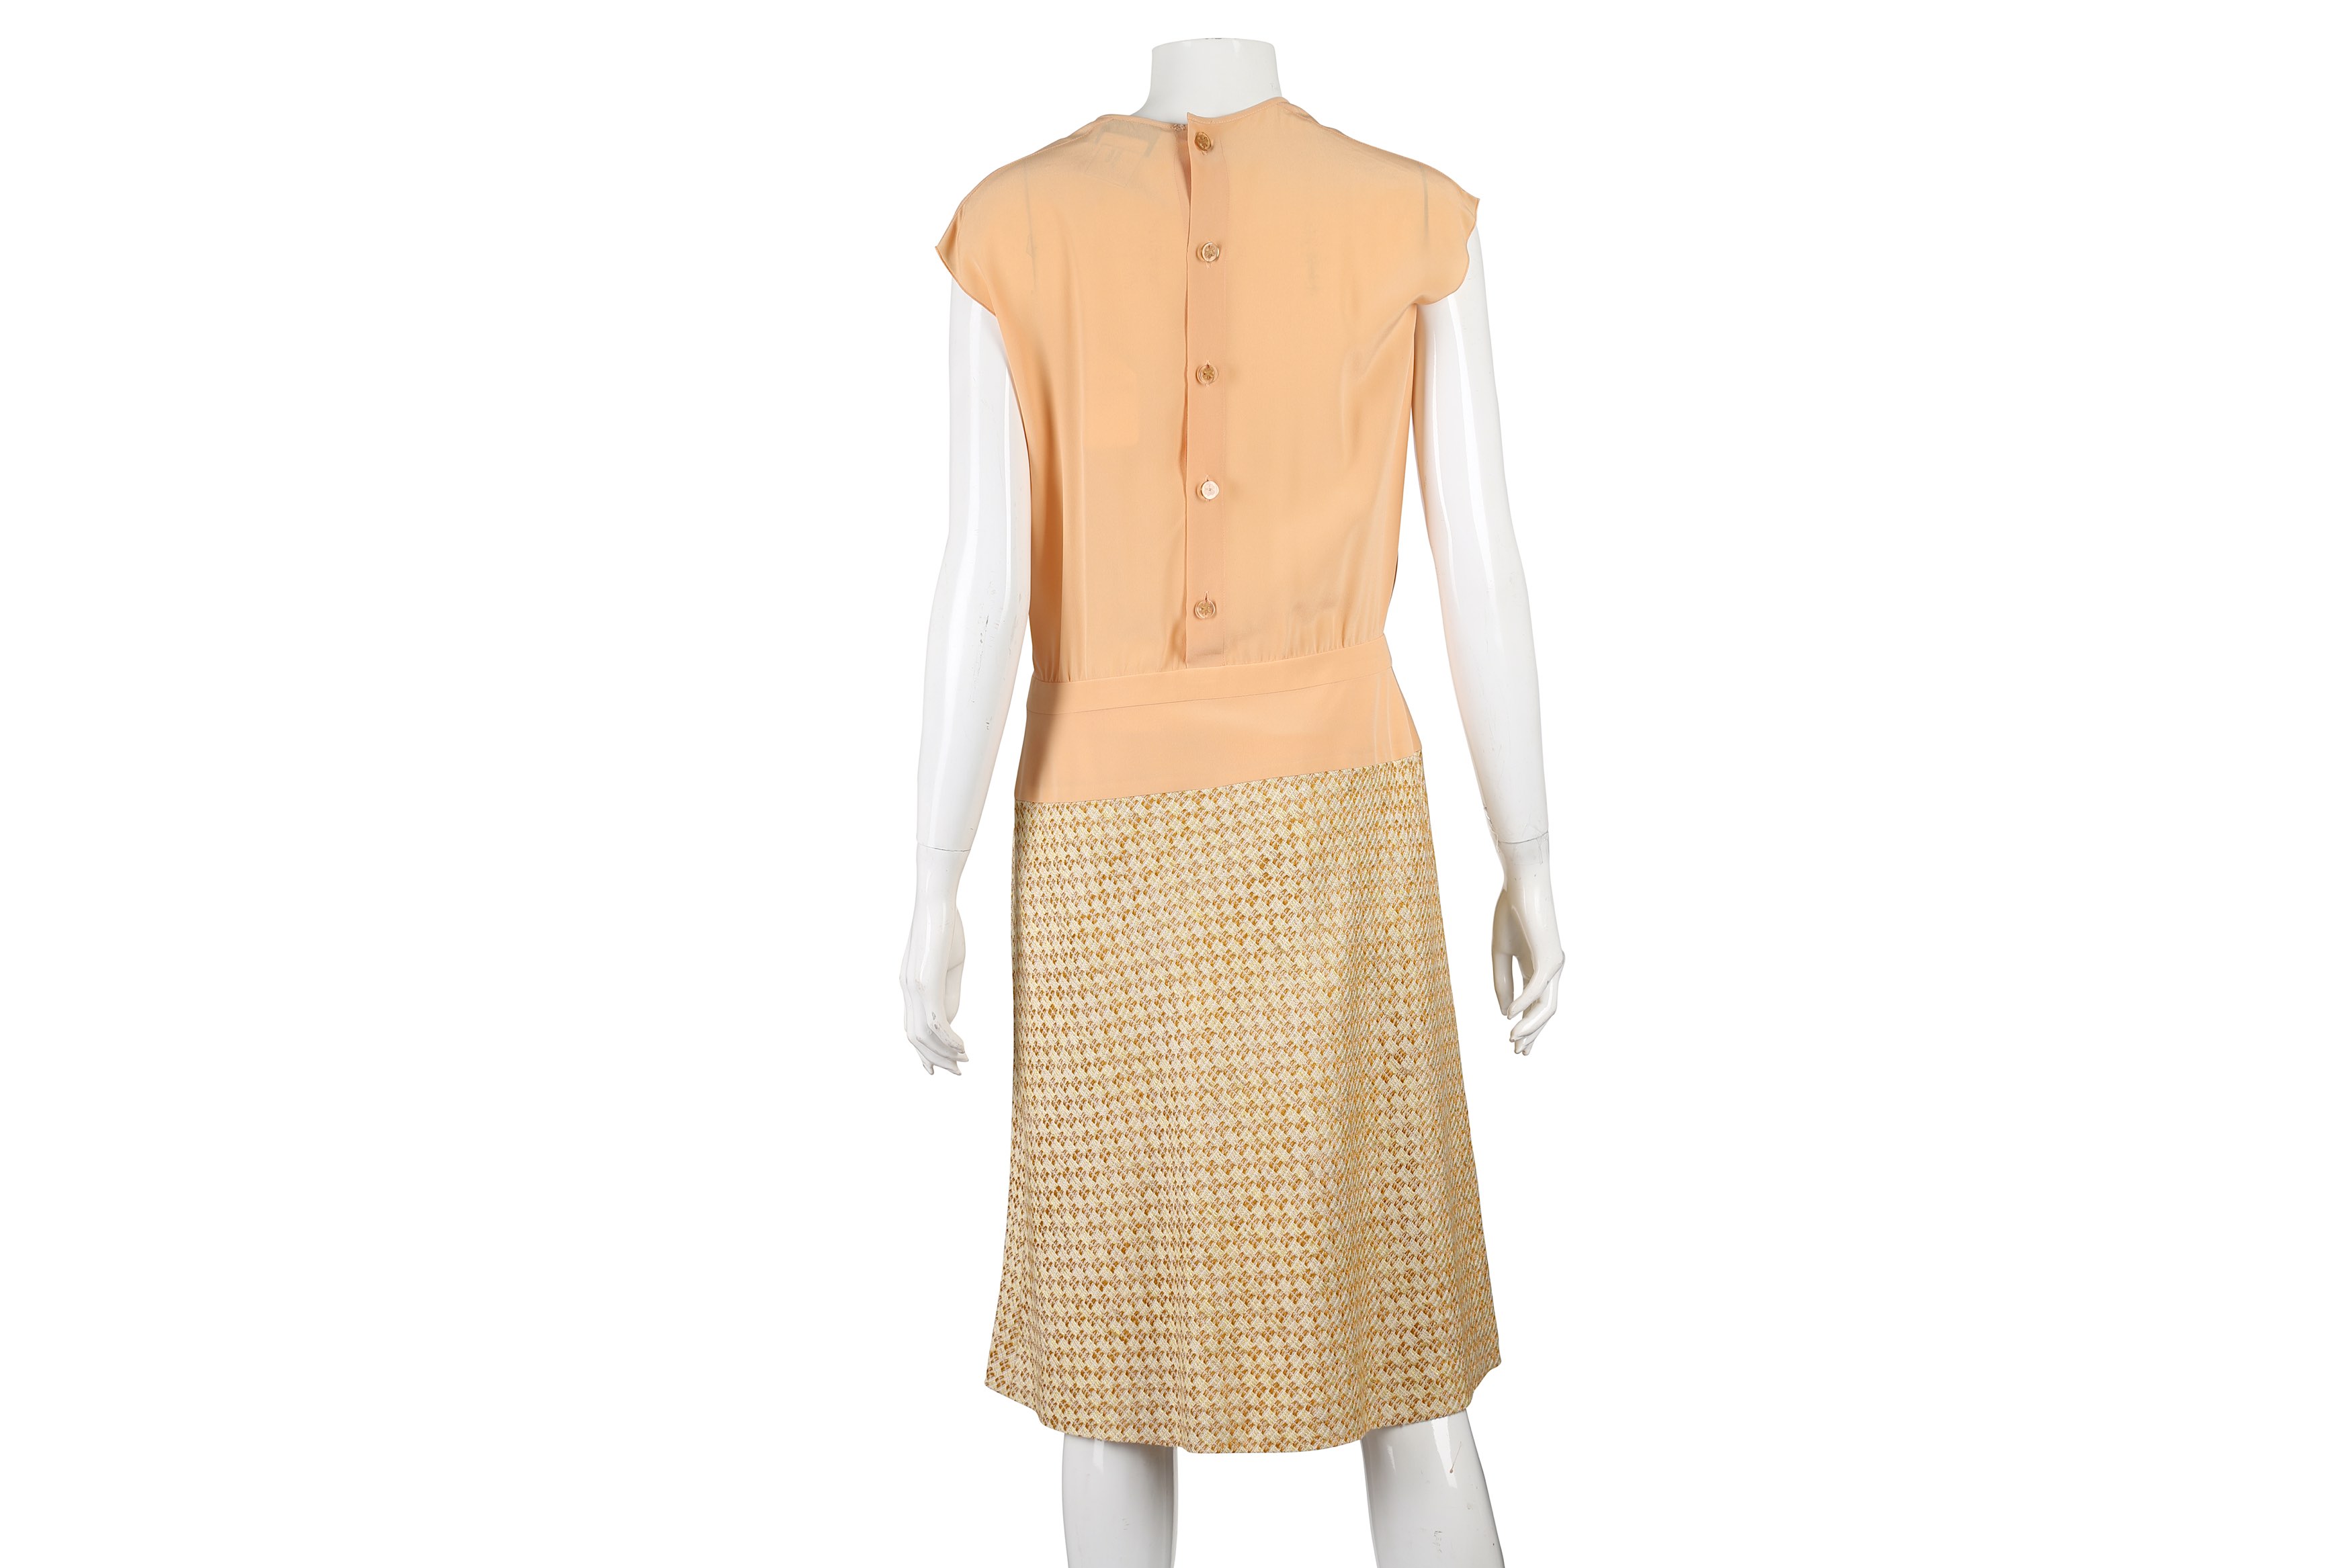 Chanel Honey Tweed Dress and Coat Suit - Size 42 - Image 5 of 8